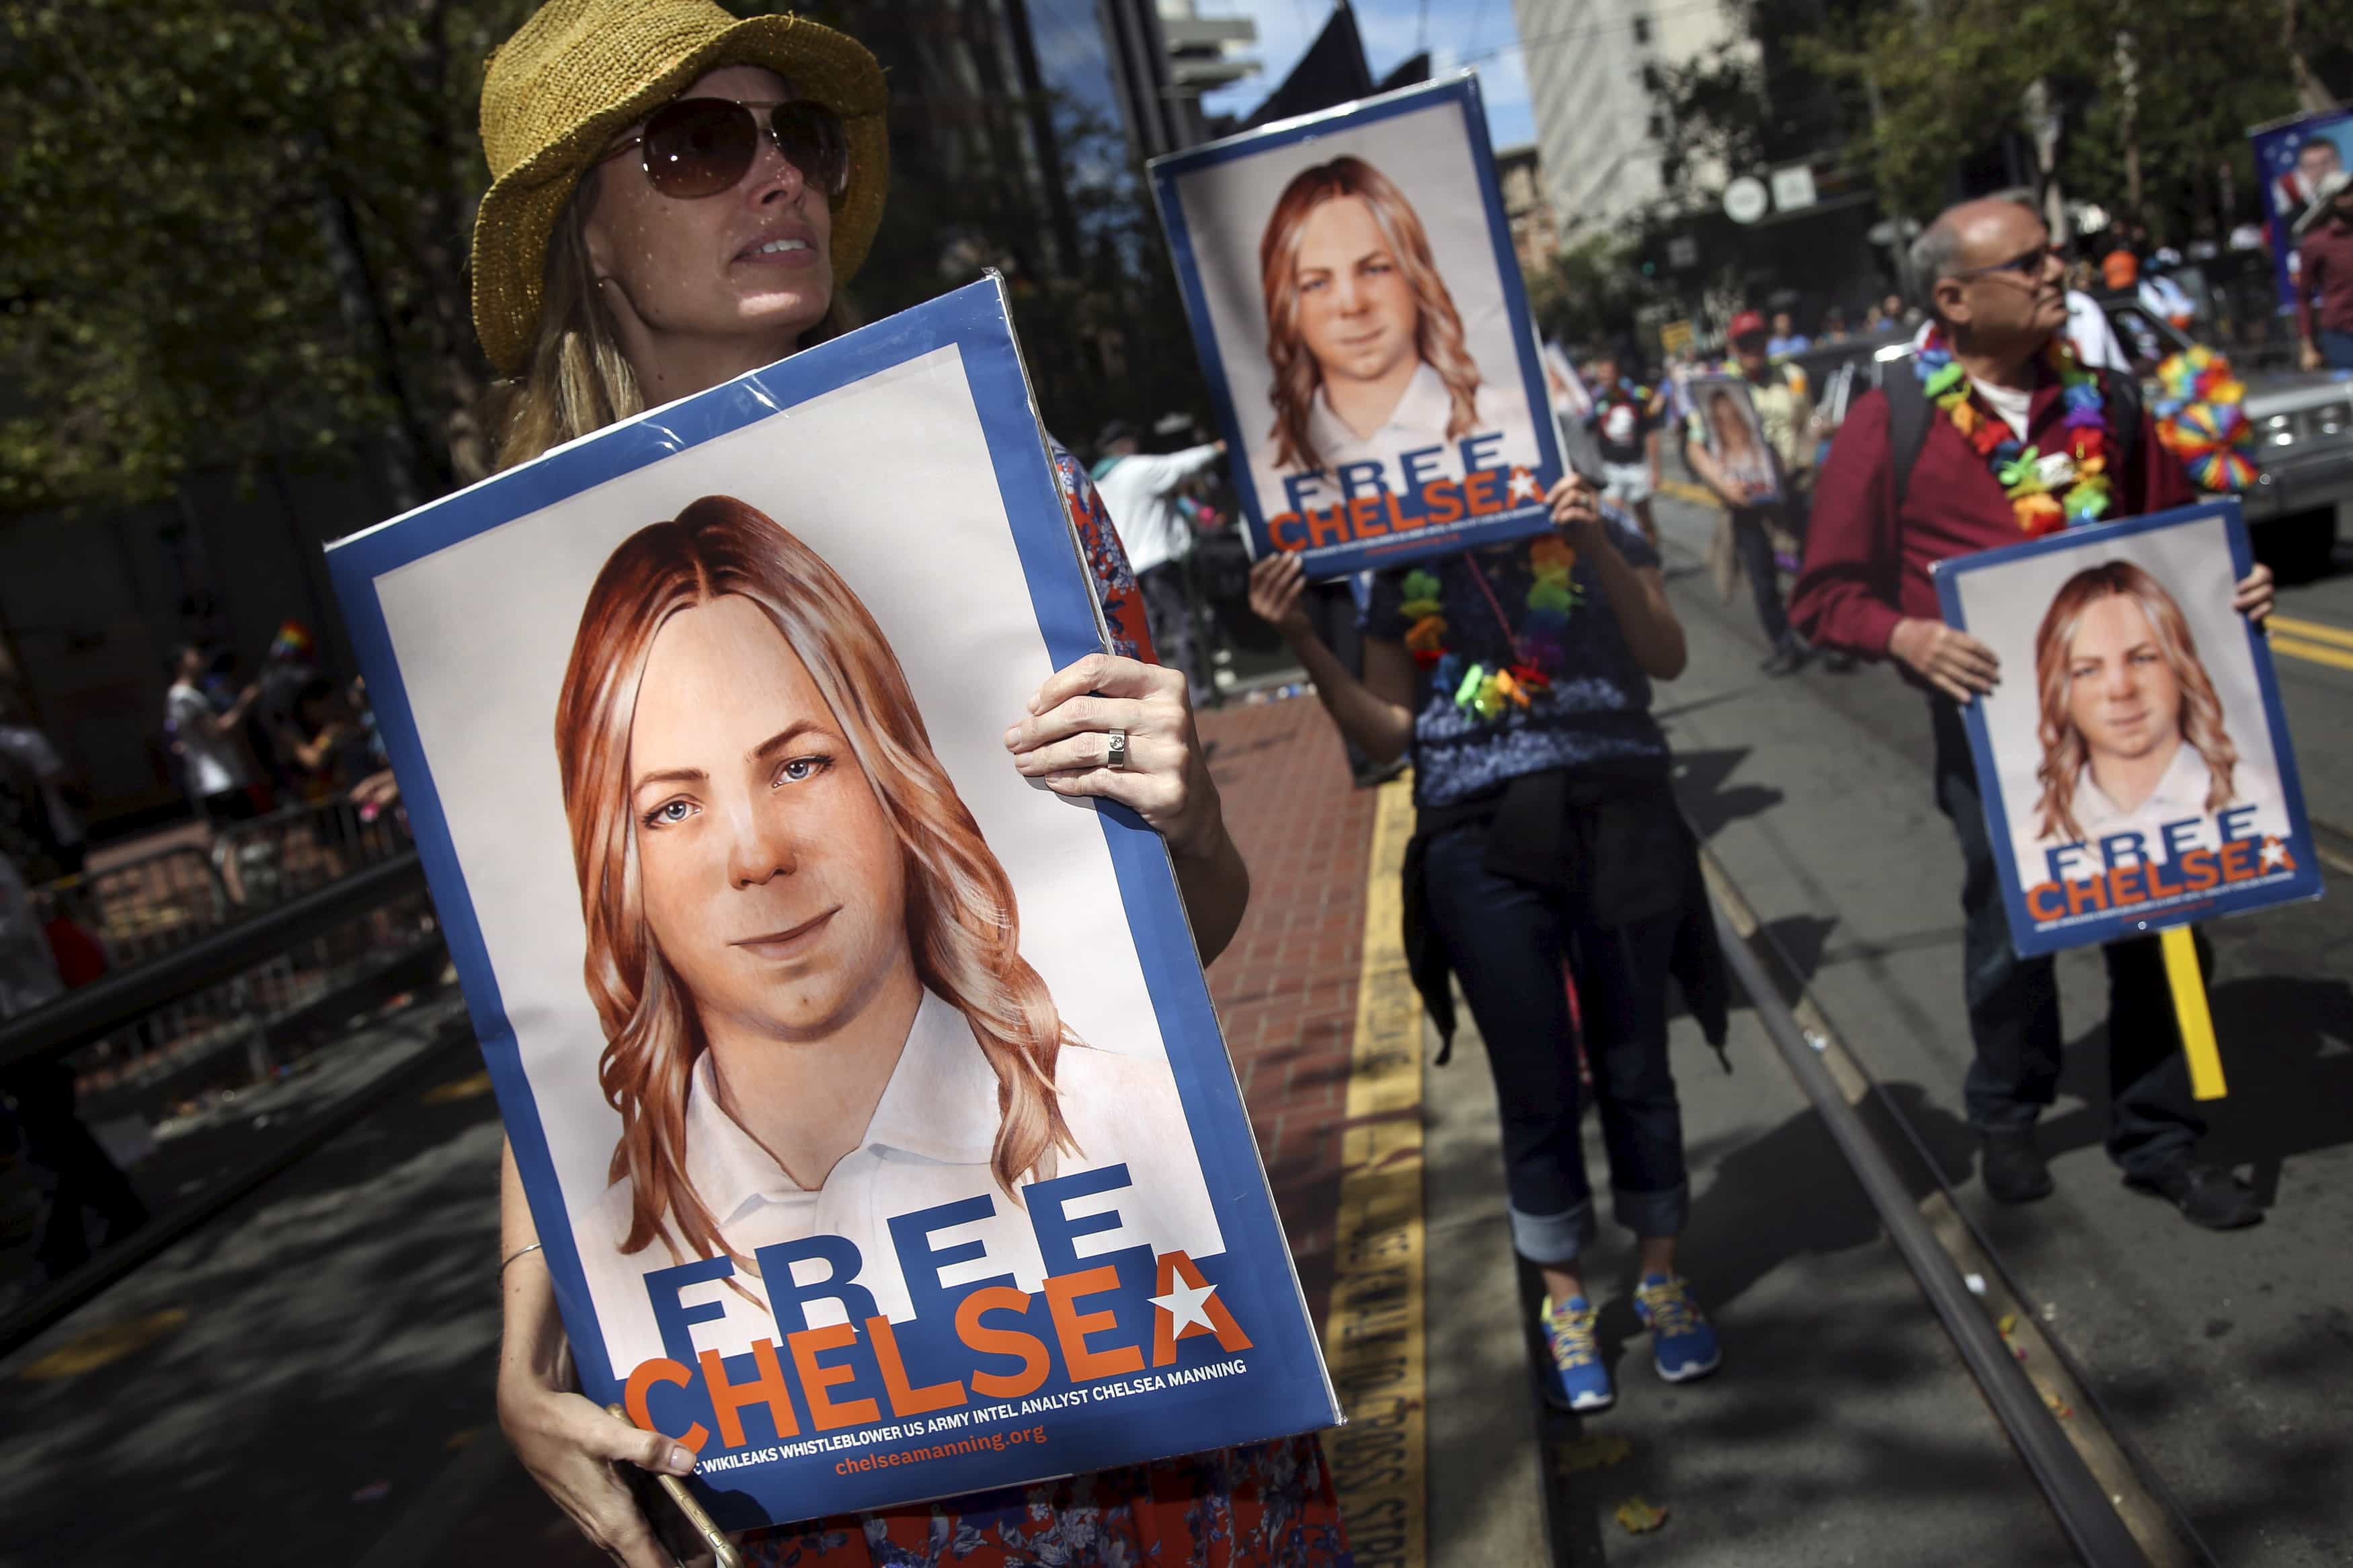 People hold signs calling for the release of imprisoned wikileaks whistleblower Chelsea Manning while marching in a gay pride parade in San Francisco, California, 28 June 2015, REUTERS/Elijah Nouvelage